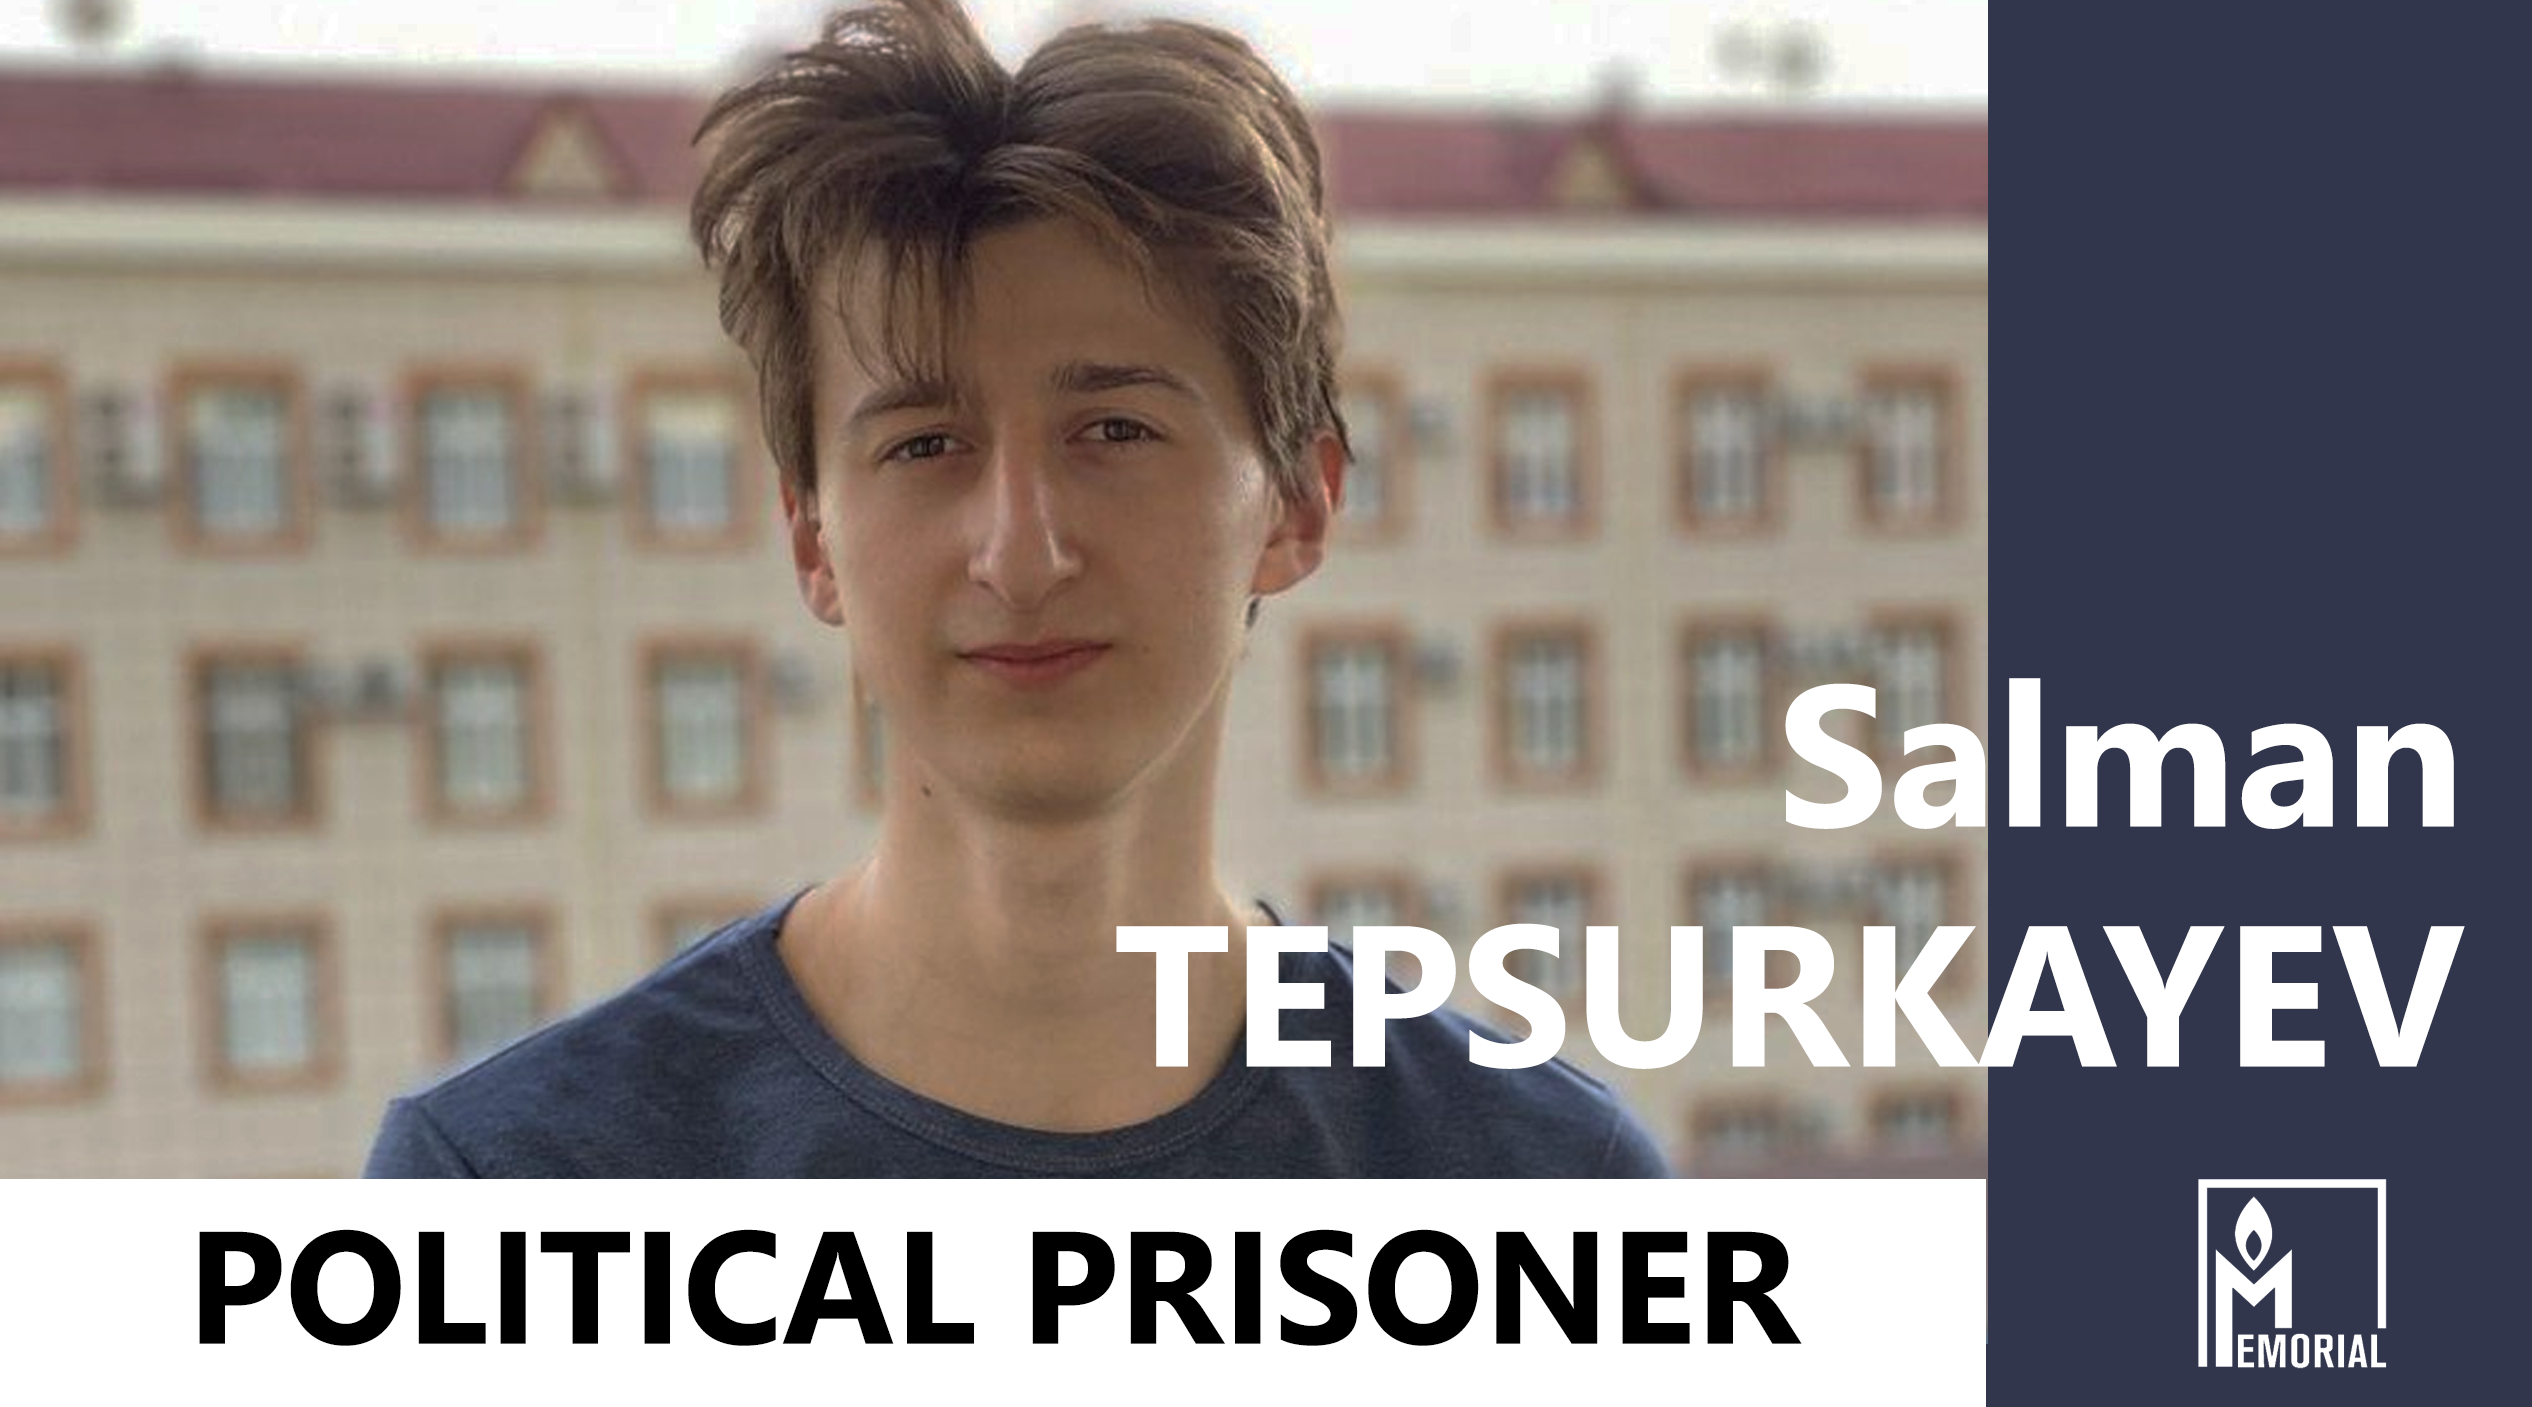 Salman Tepsurkayev, who was abducted, is a political prisoner